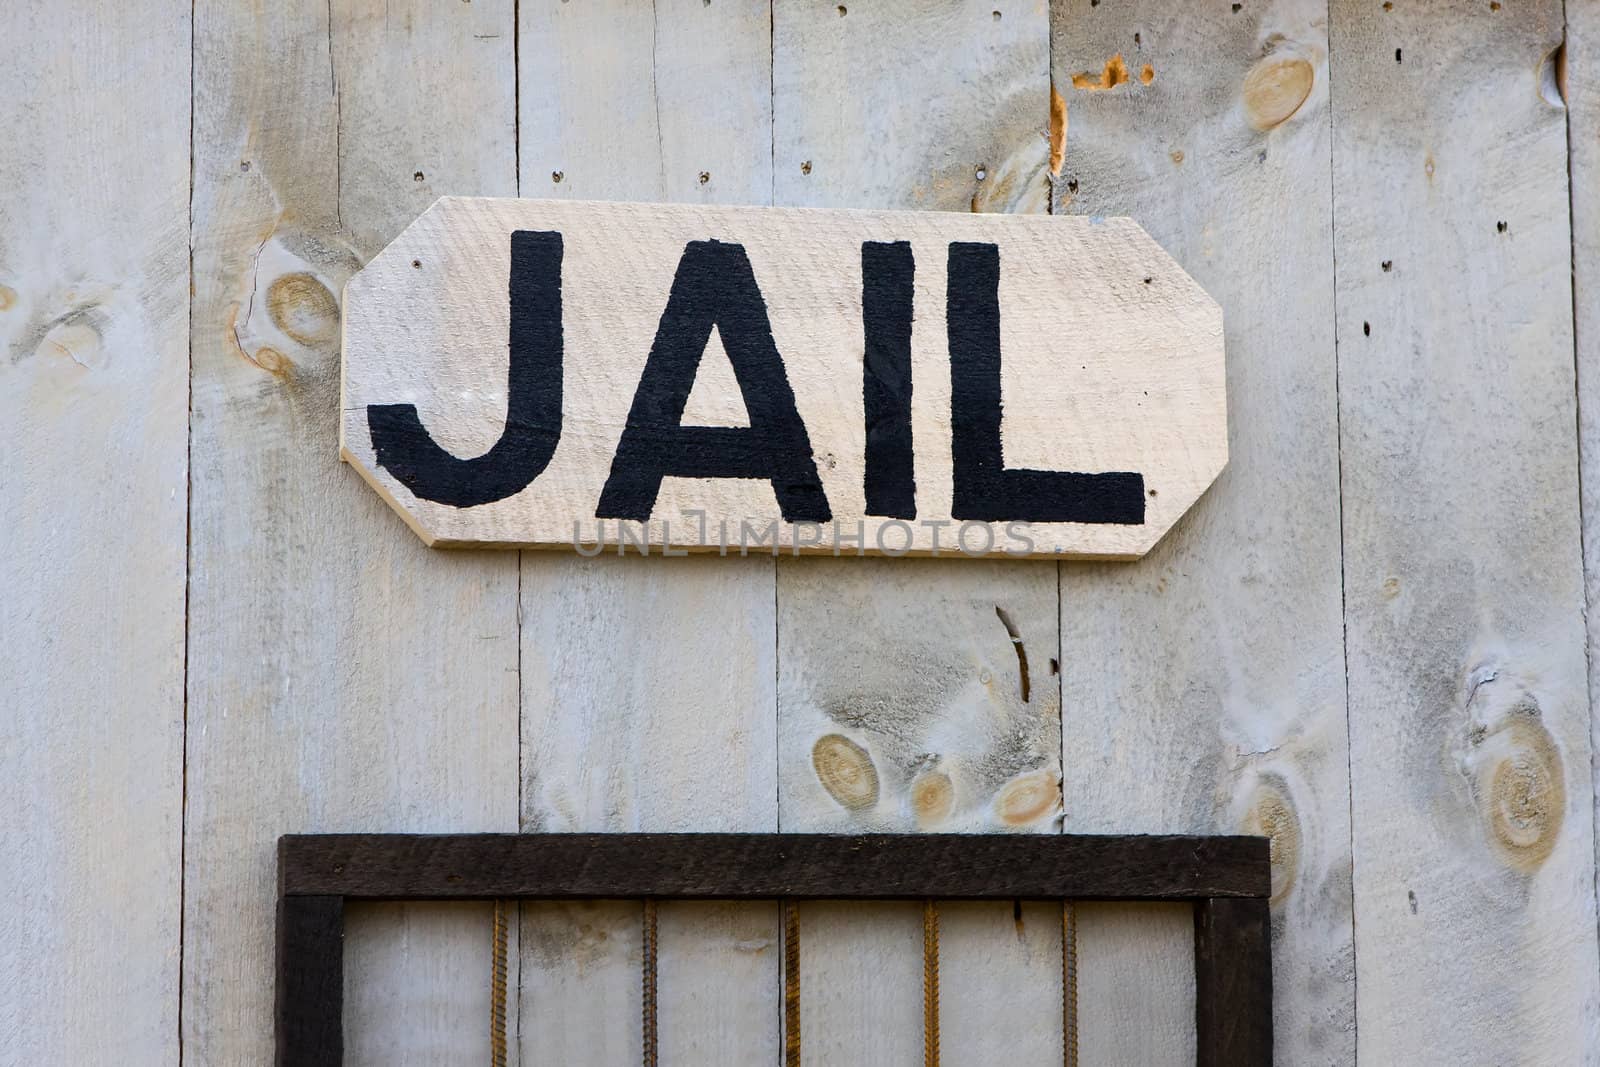 An old-fashioned Western jail sign hanging on a wall.